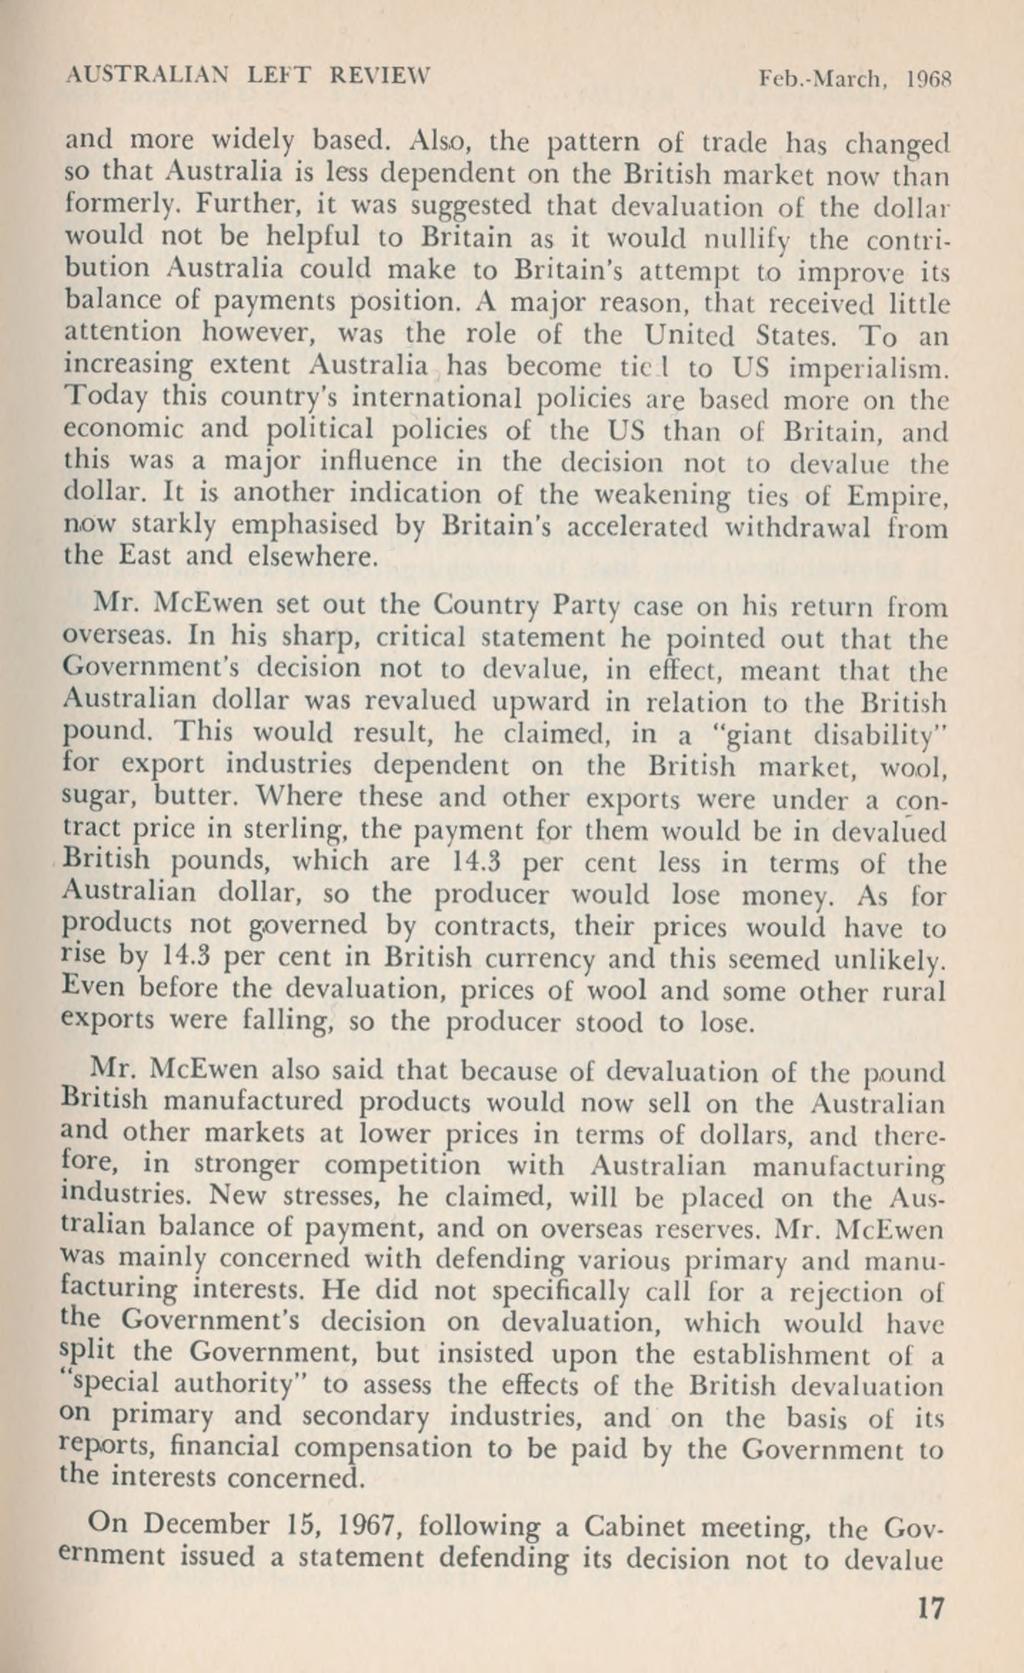 AUSTRALIAN LEFT REVIEW Feb.-M arch, 1968 and more widely based. Also, the pattern of trade has changed so that Australia is less dependent on the British m arket now than formerly.